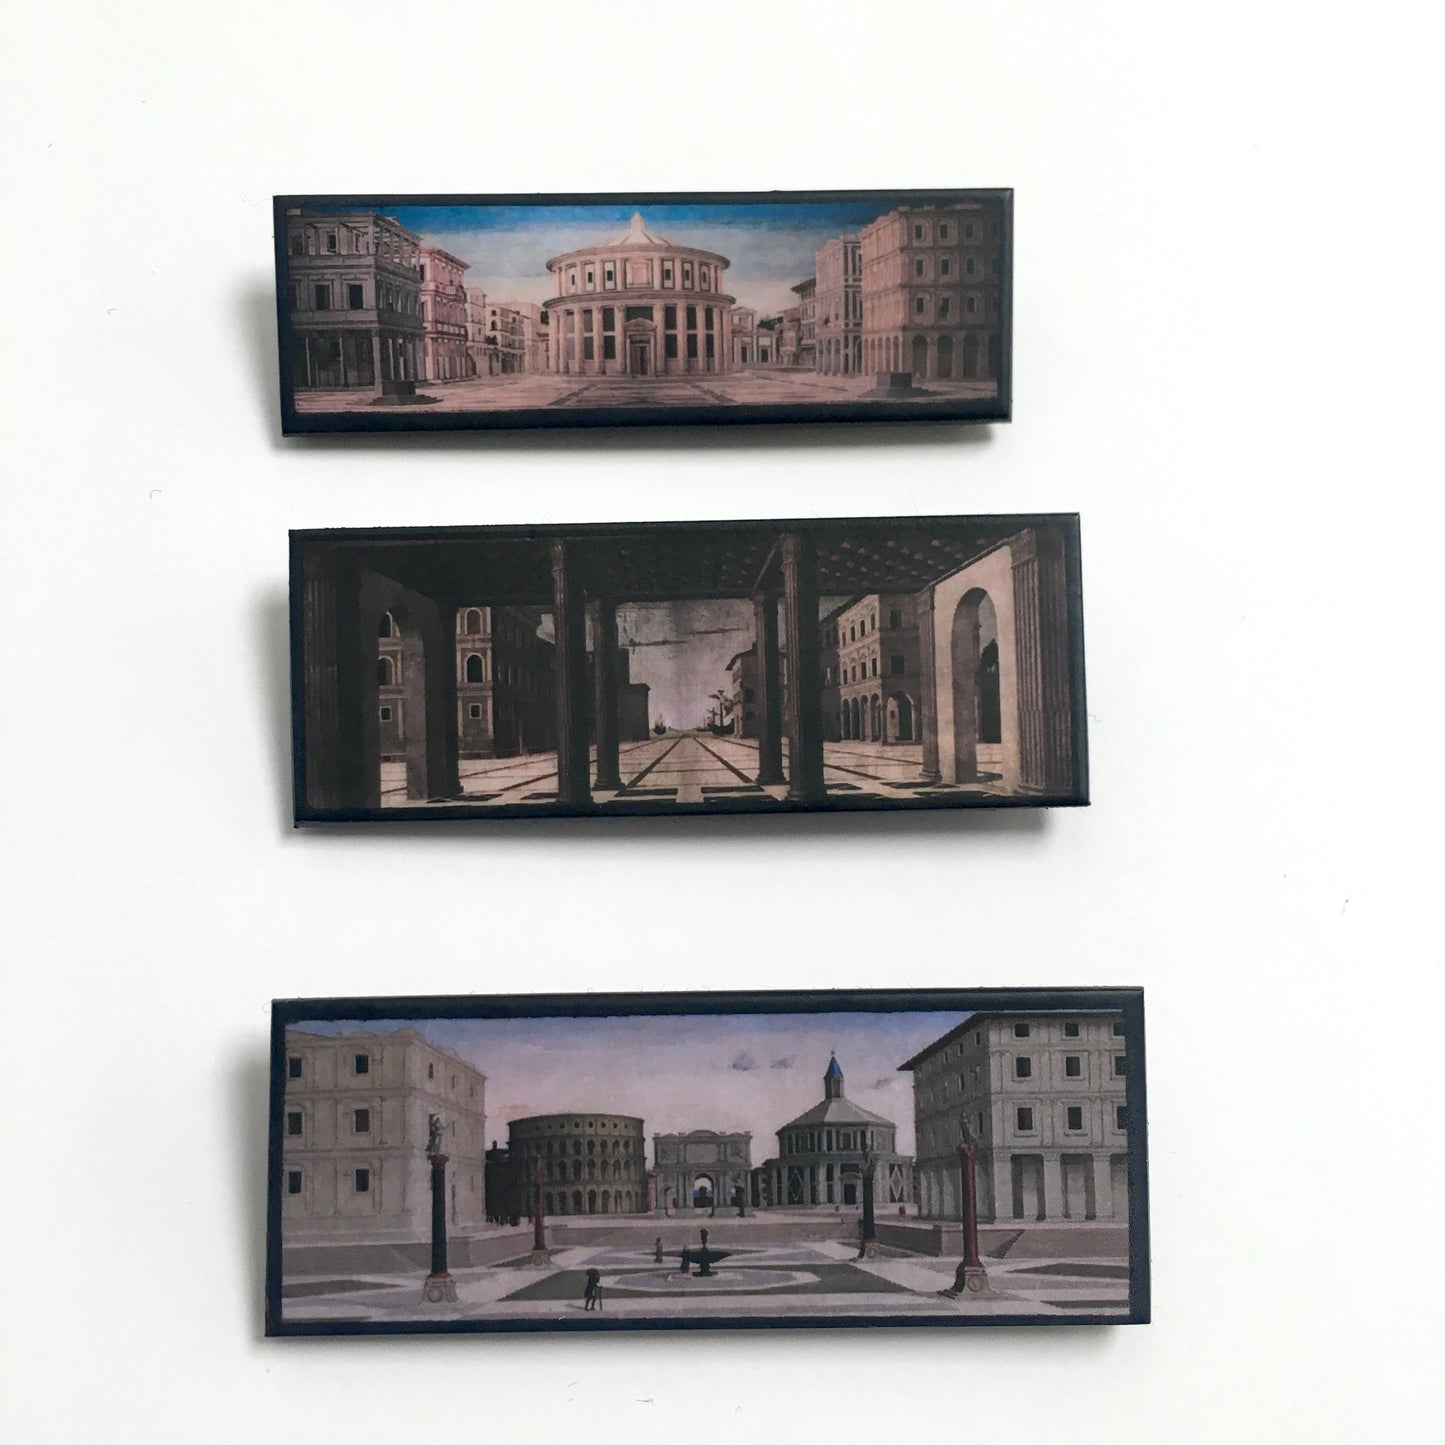 Set of three art brooches “The ideal City” prospectives of Urbino, Berlin and Baltimore. Prospective arqchitectonical paintings from Italian Reinassance. Sustainable, statement brooches handmade from wood by Obljewellery